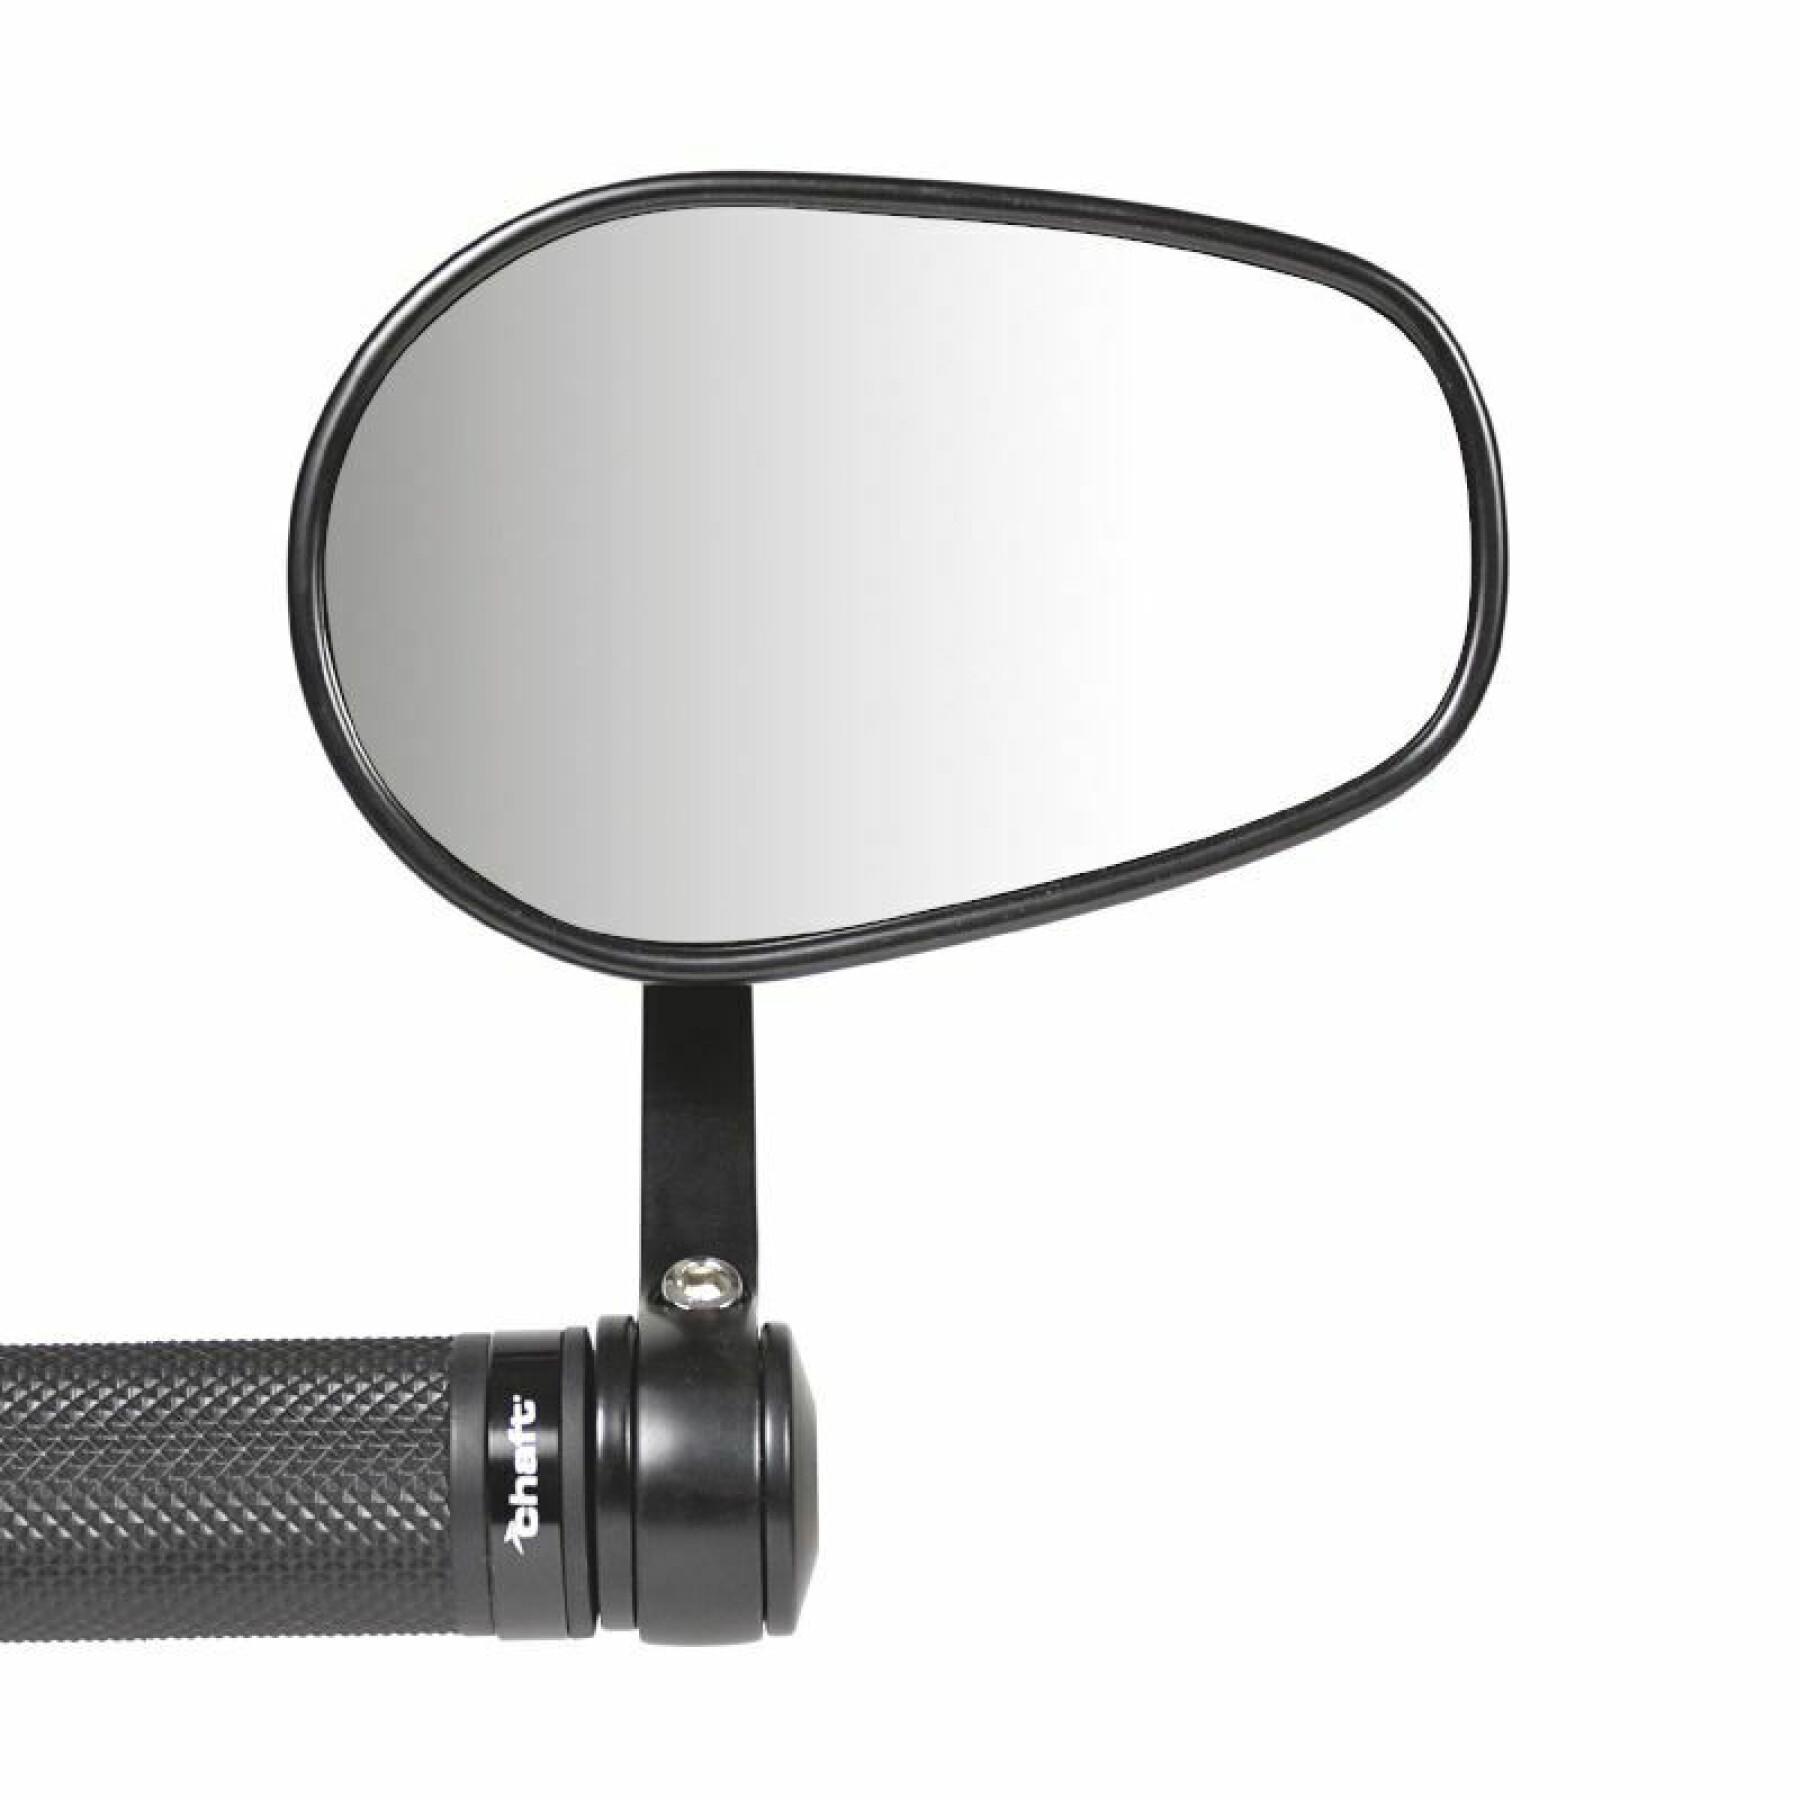 Reversible approved motorcycle mirror Chaft drive